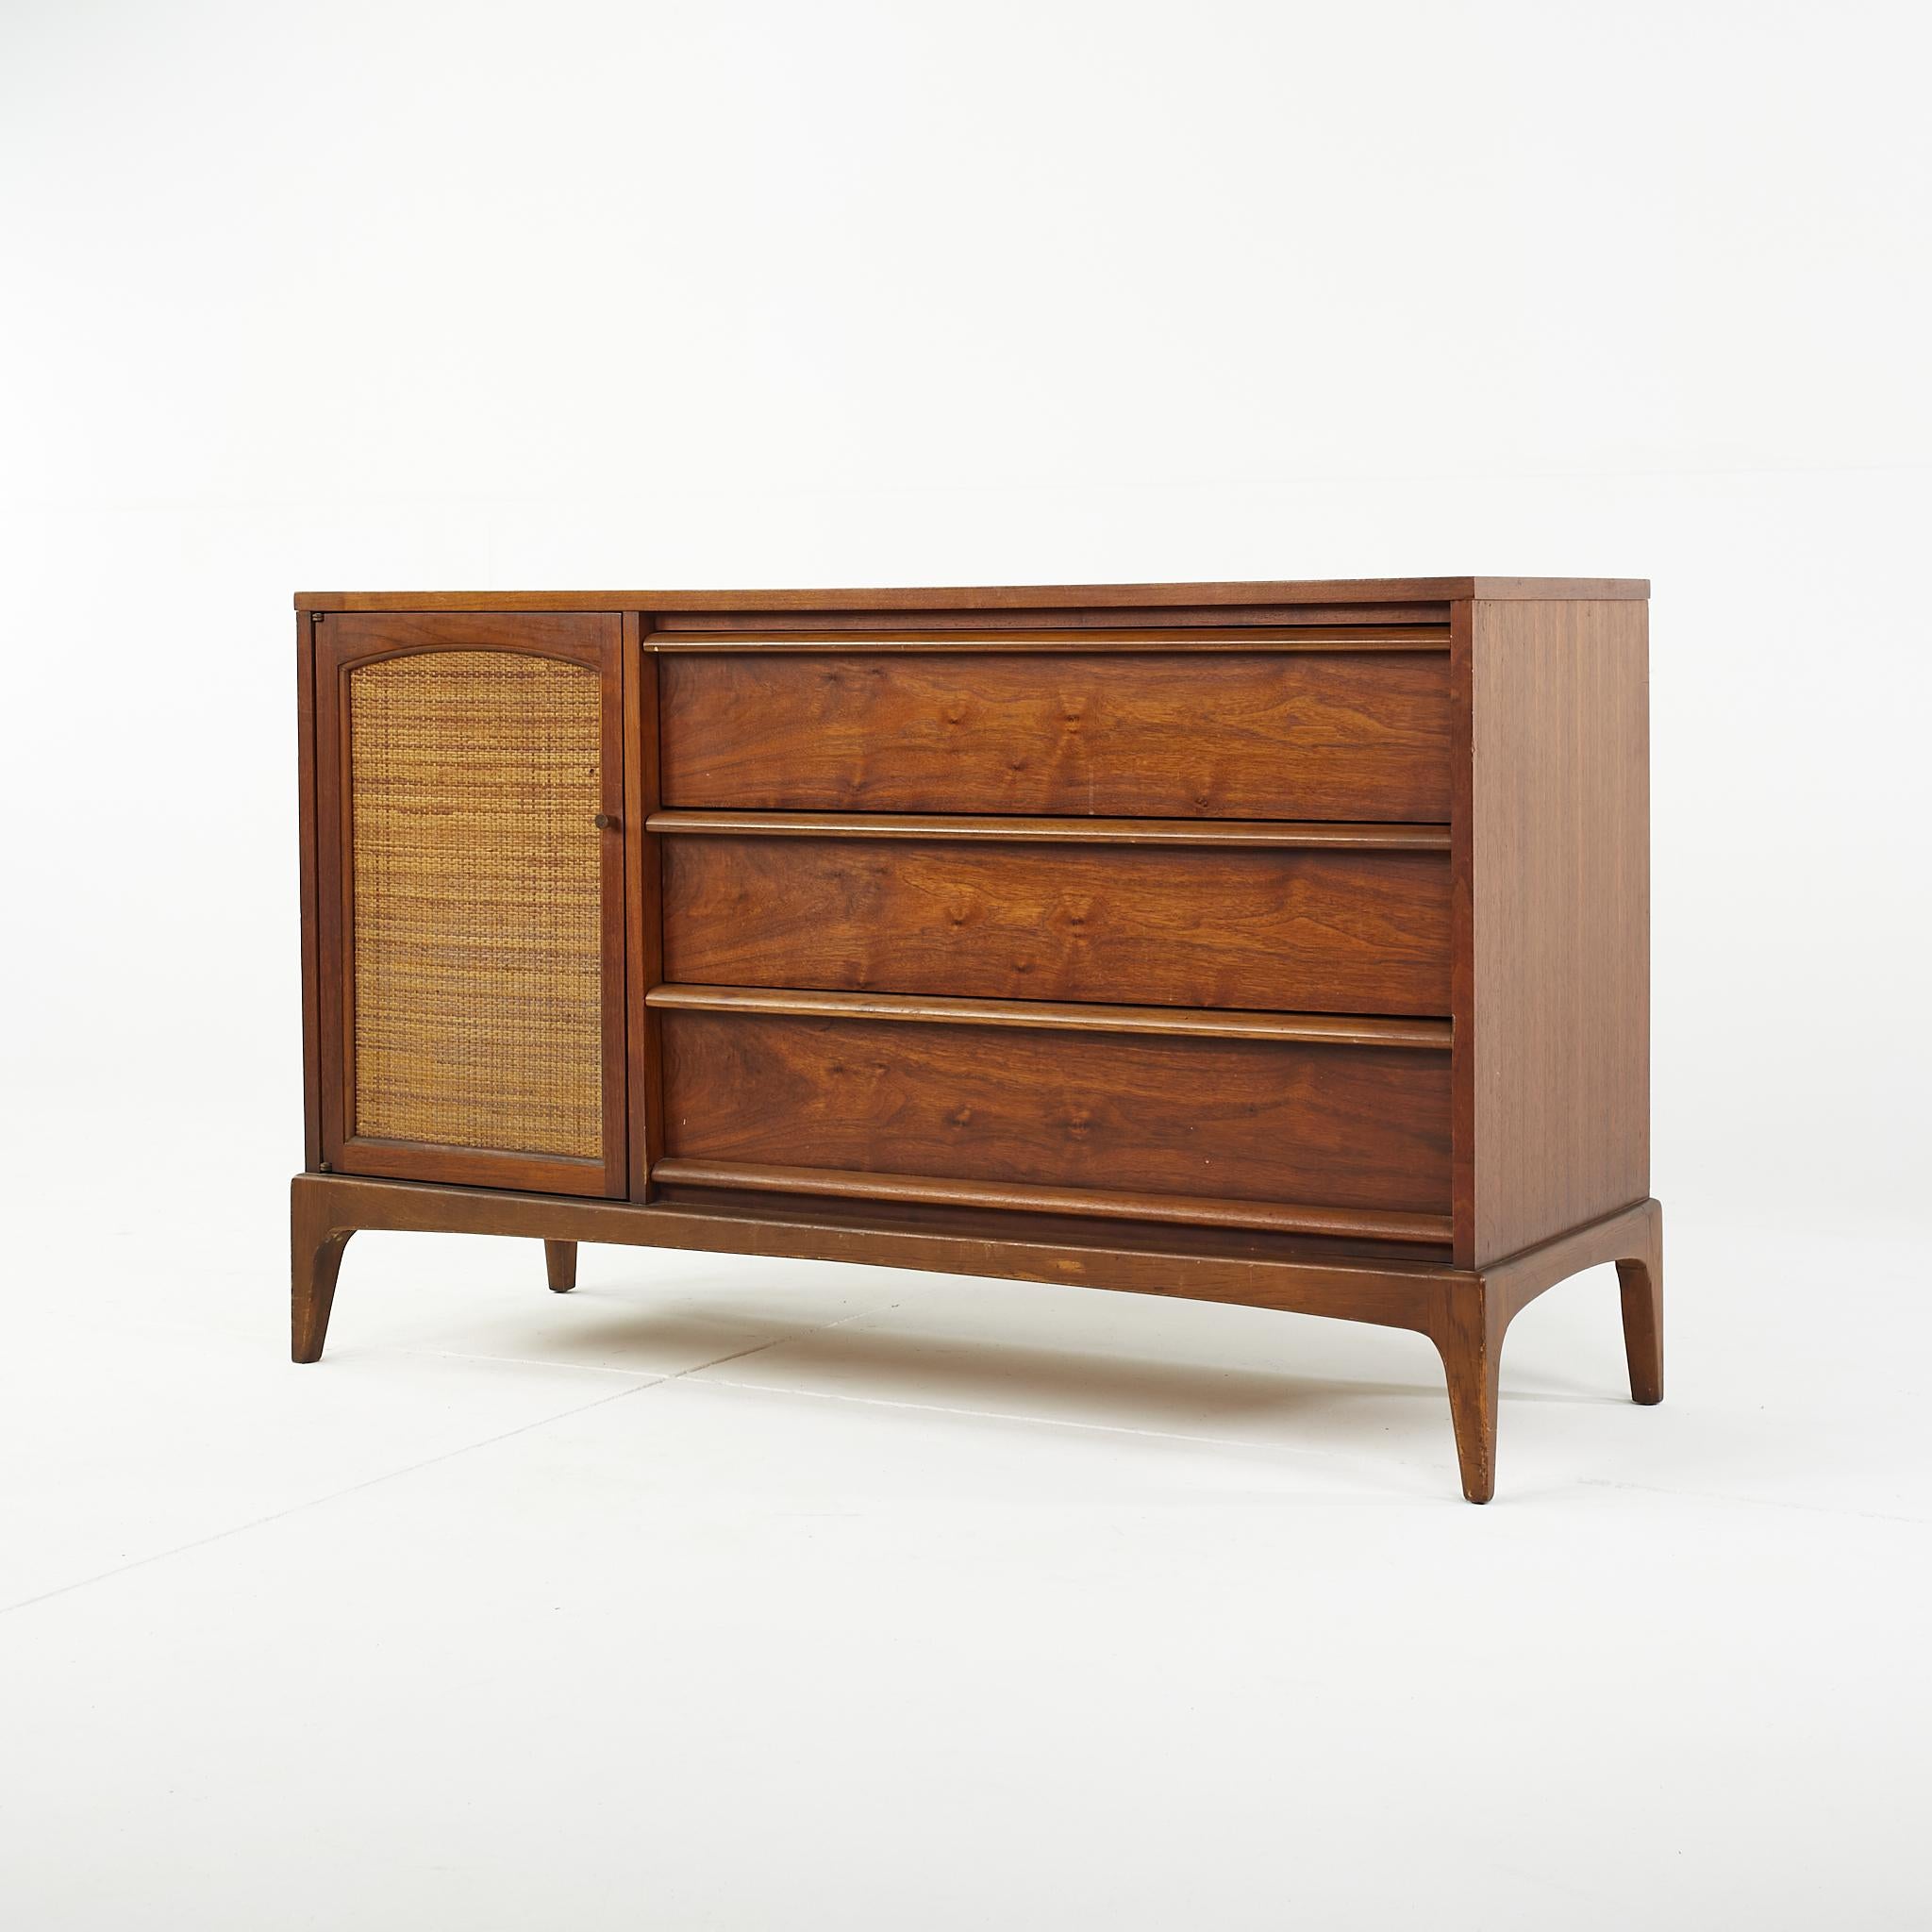 Late 20th Century Lane Rhythm Mid-Century Reversible Door Walnut and Cane Buffet For Sale